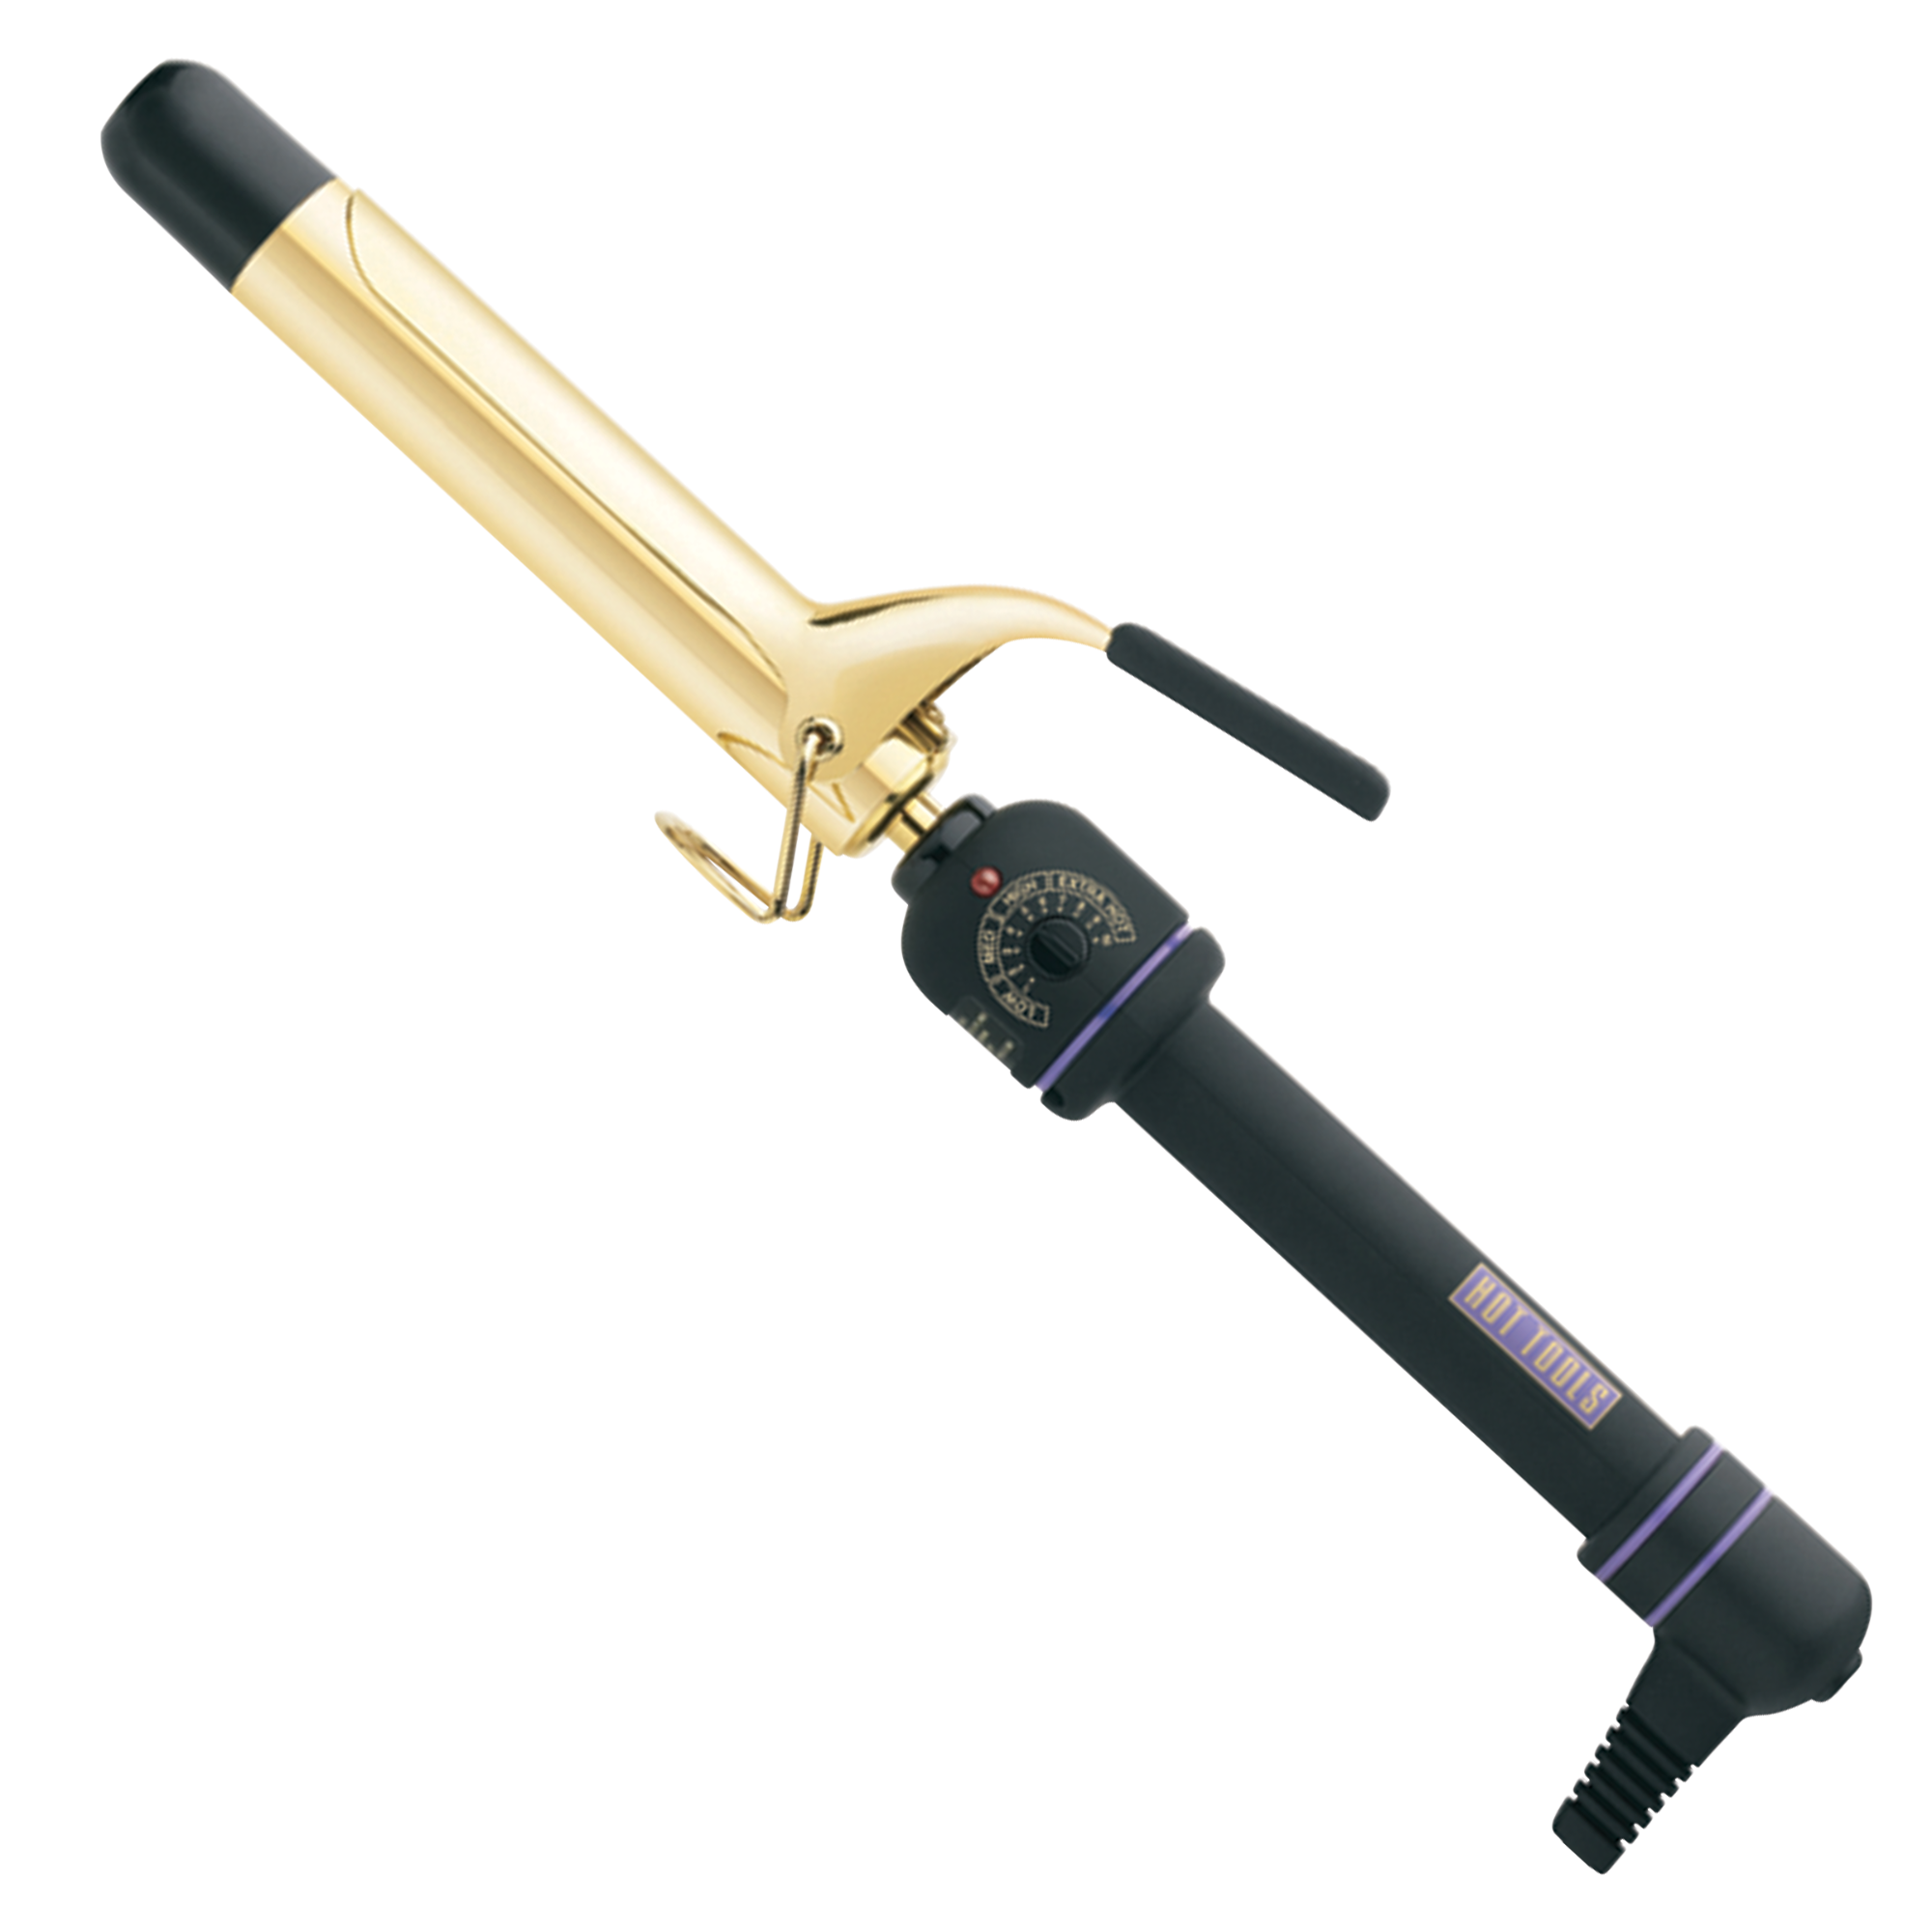 24K Gold Curling Iron/Wand - 1"